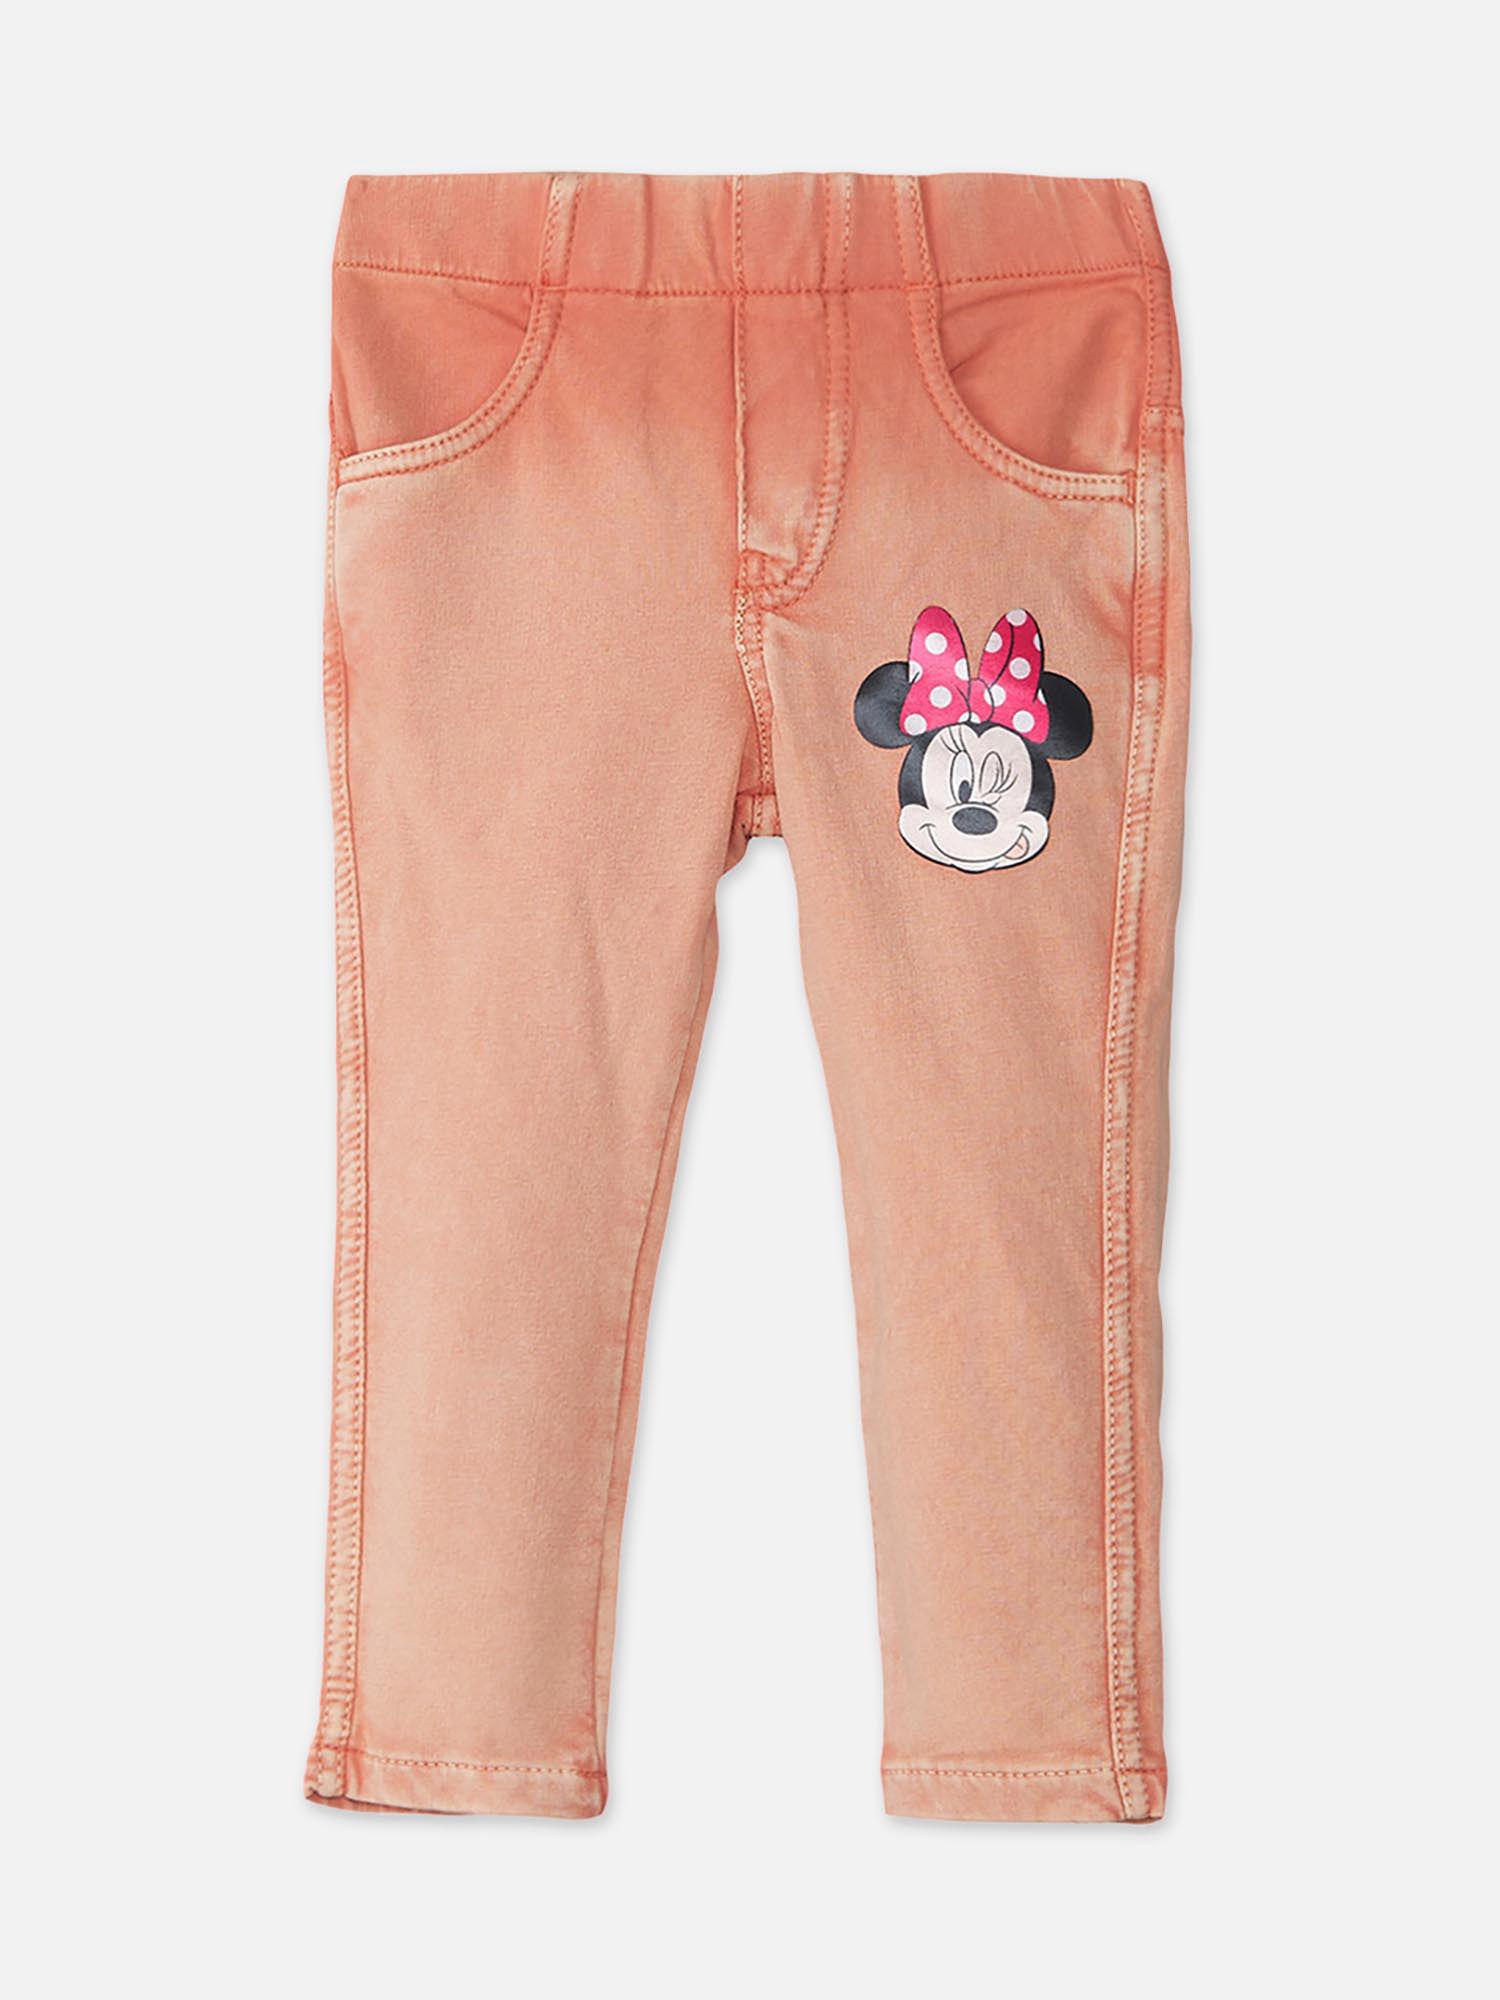 mickey & friends featured peach joggers for boys